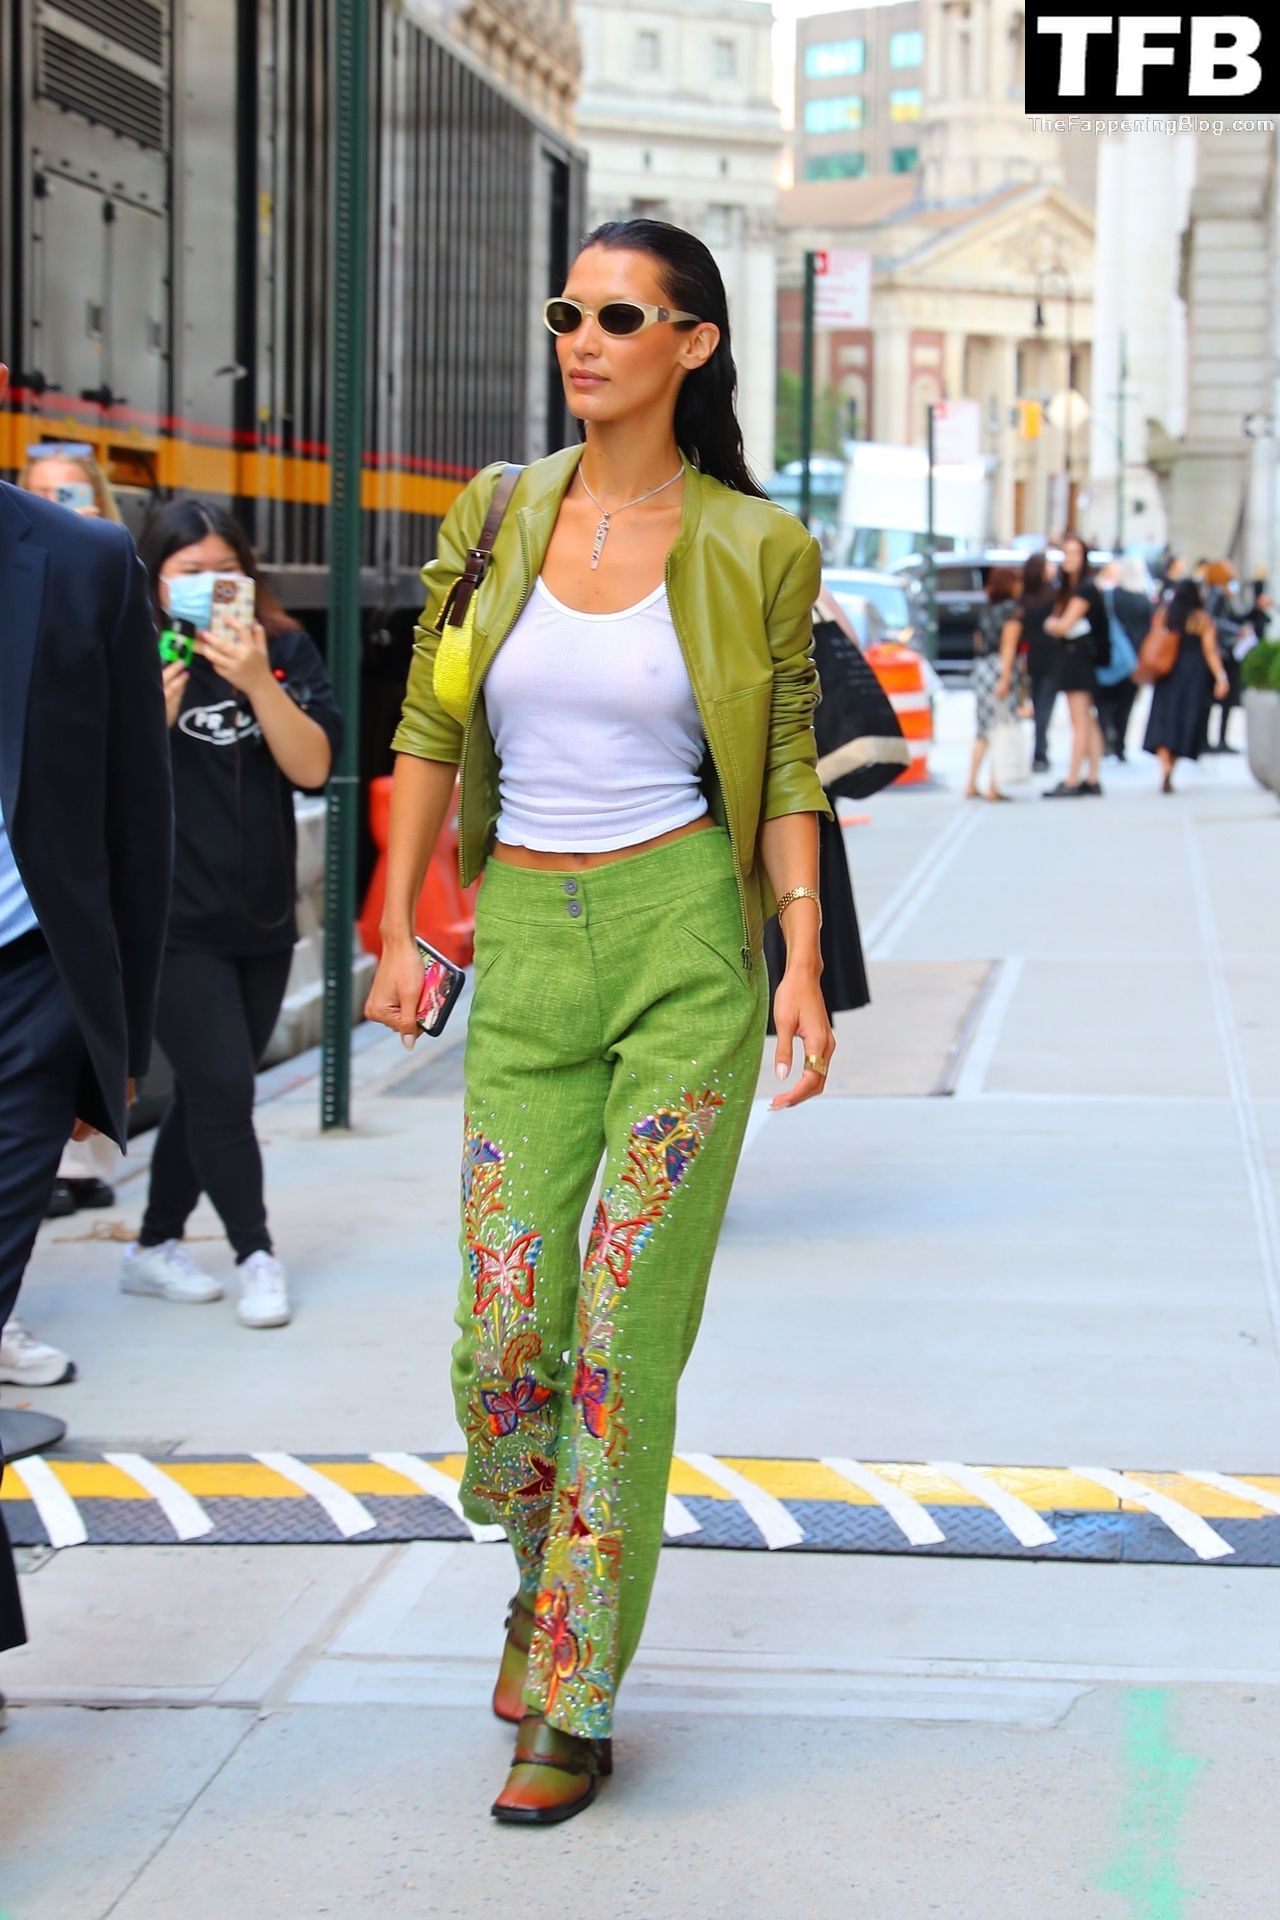 Bella Hadid See Through Braless The Fappening Blog 23 - Braless Bella Hadid Wears the Cutest Lime Green Look While Out in NYC (54 Photos)